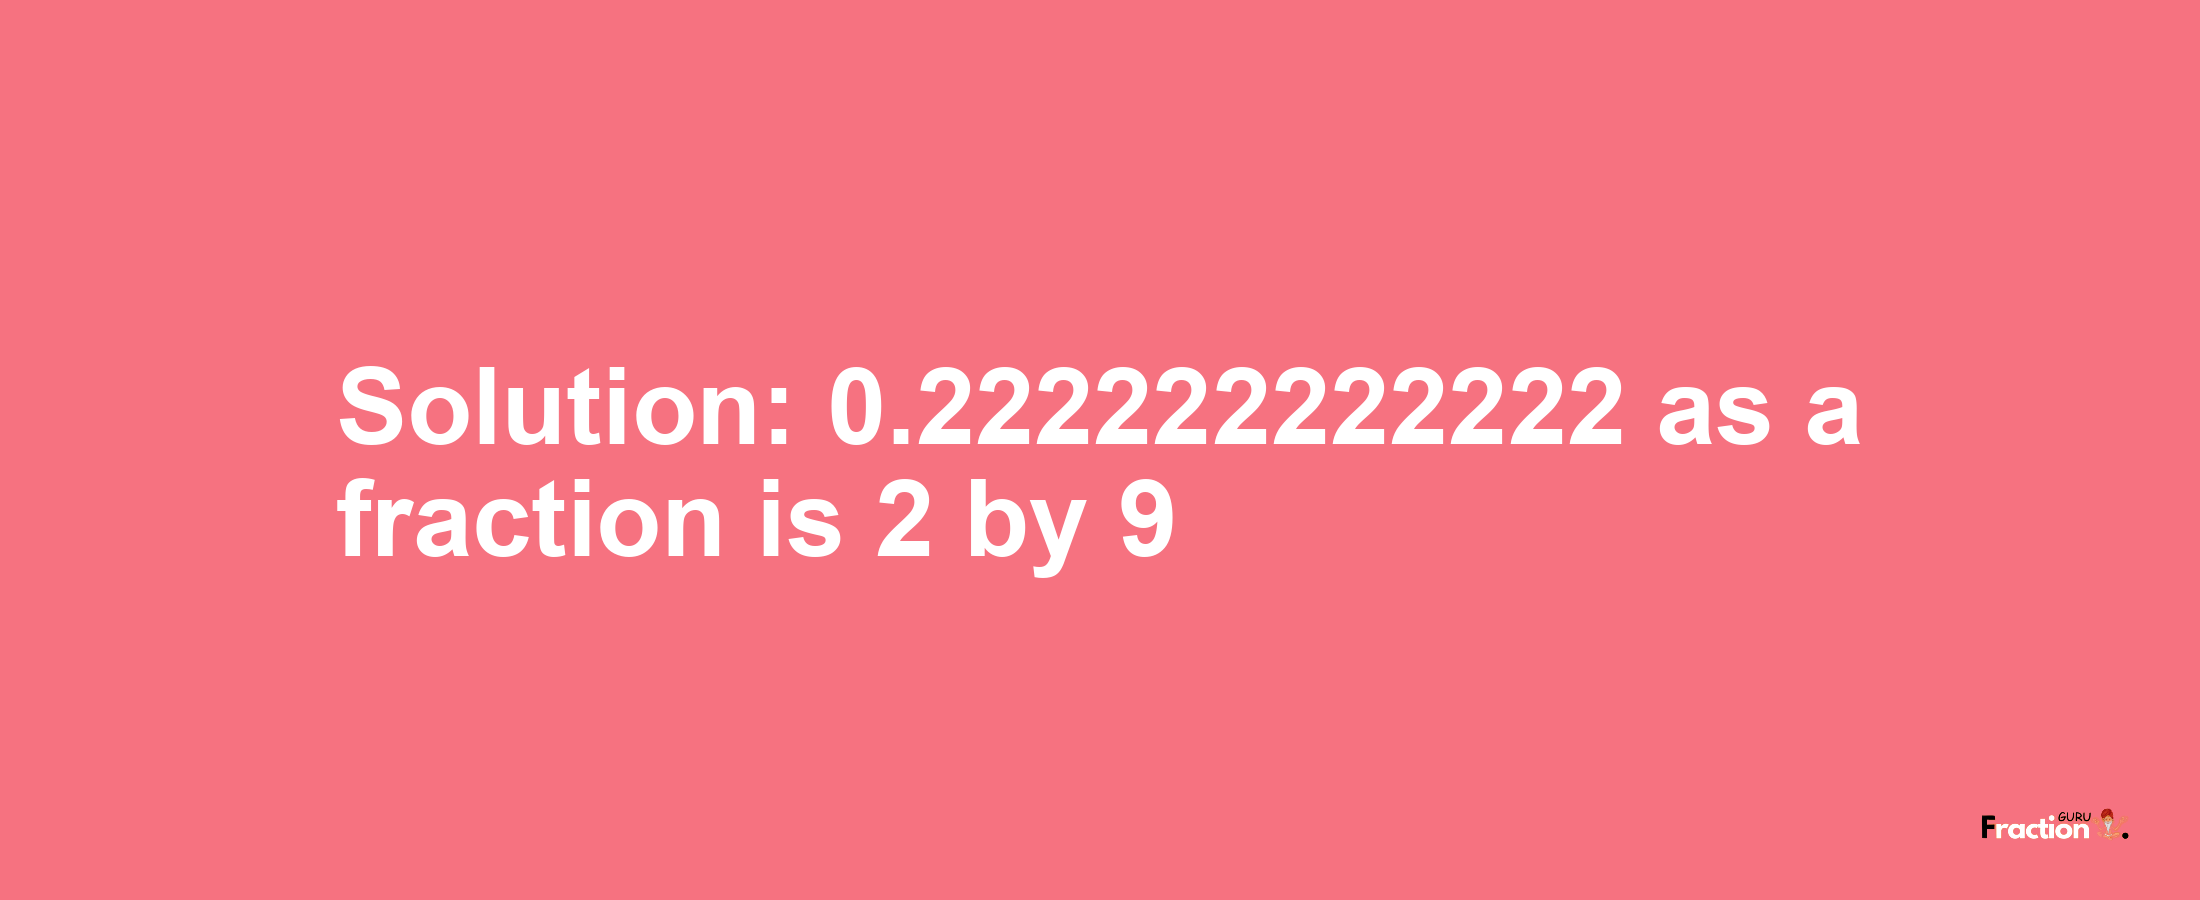 Solution:0.222222222222 as a fraction is 2/9